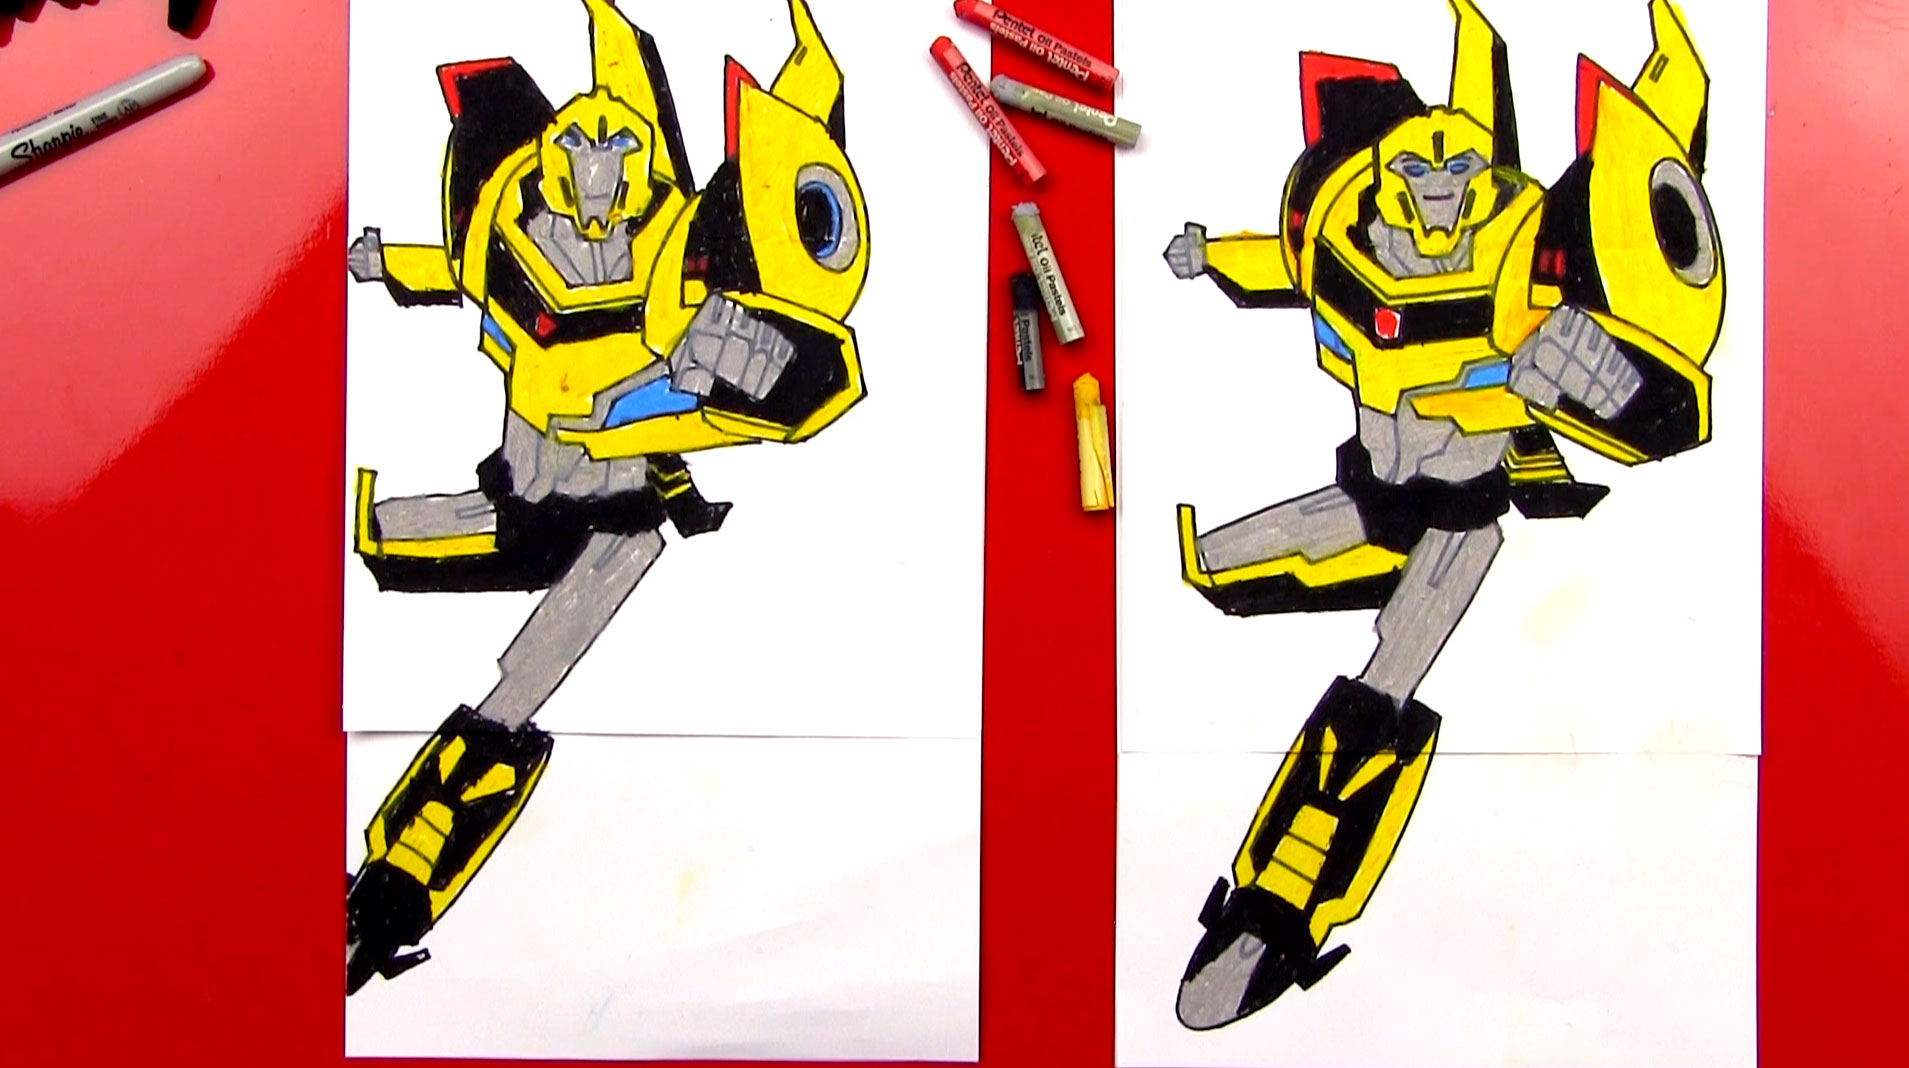 1909x1068 How To Draw Bumblebee Transformer.